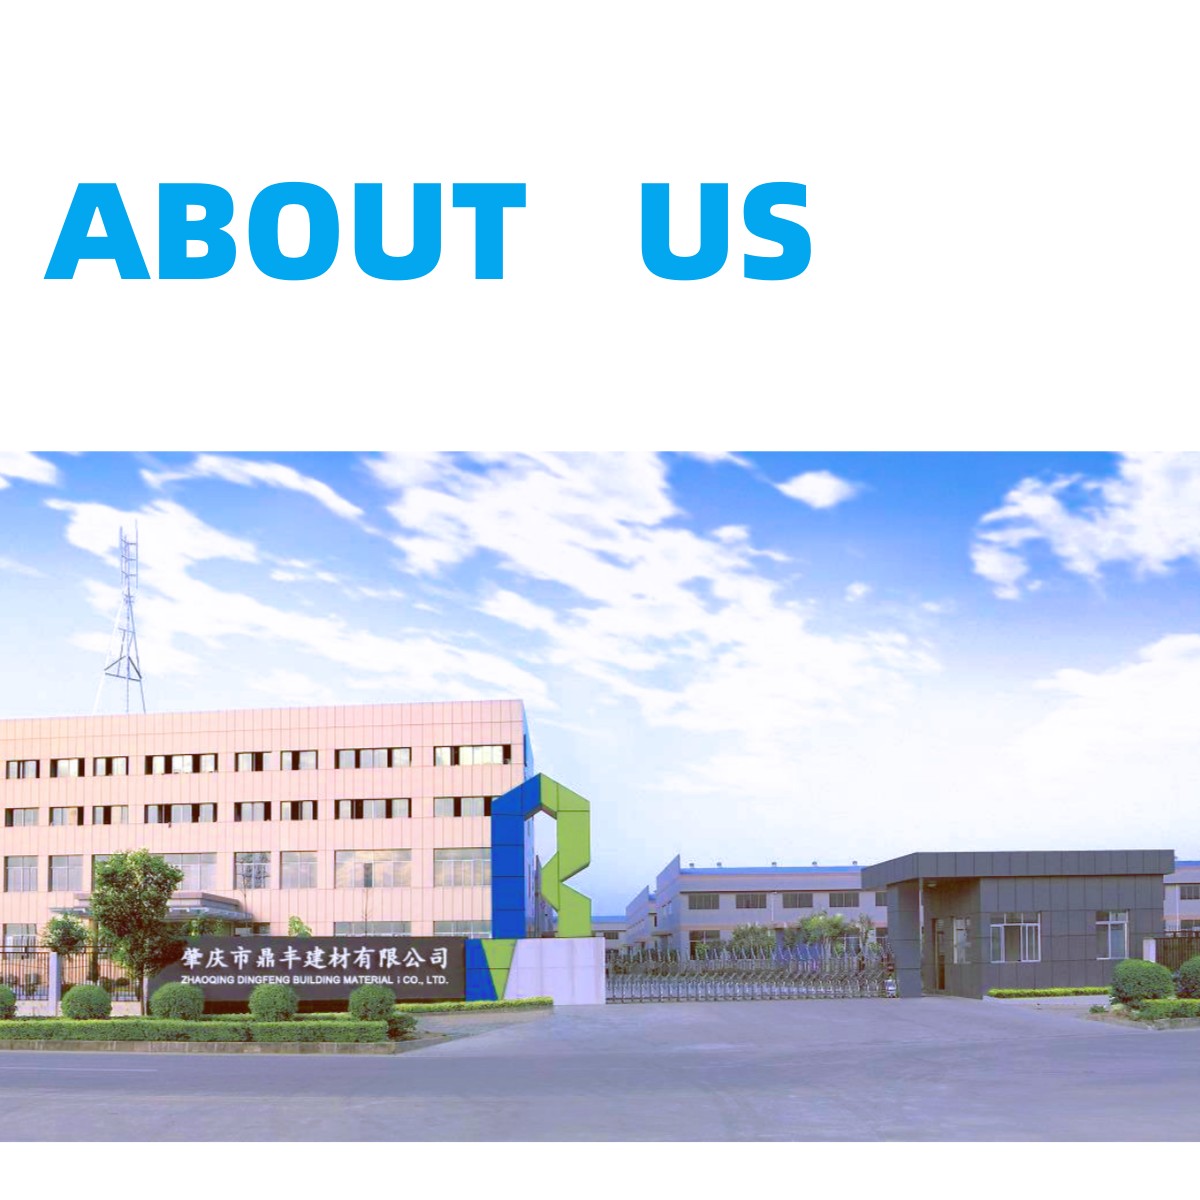 Zhaoqing Dingfeng Building Materials Co.,Ltd  come back working